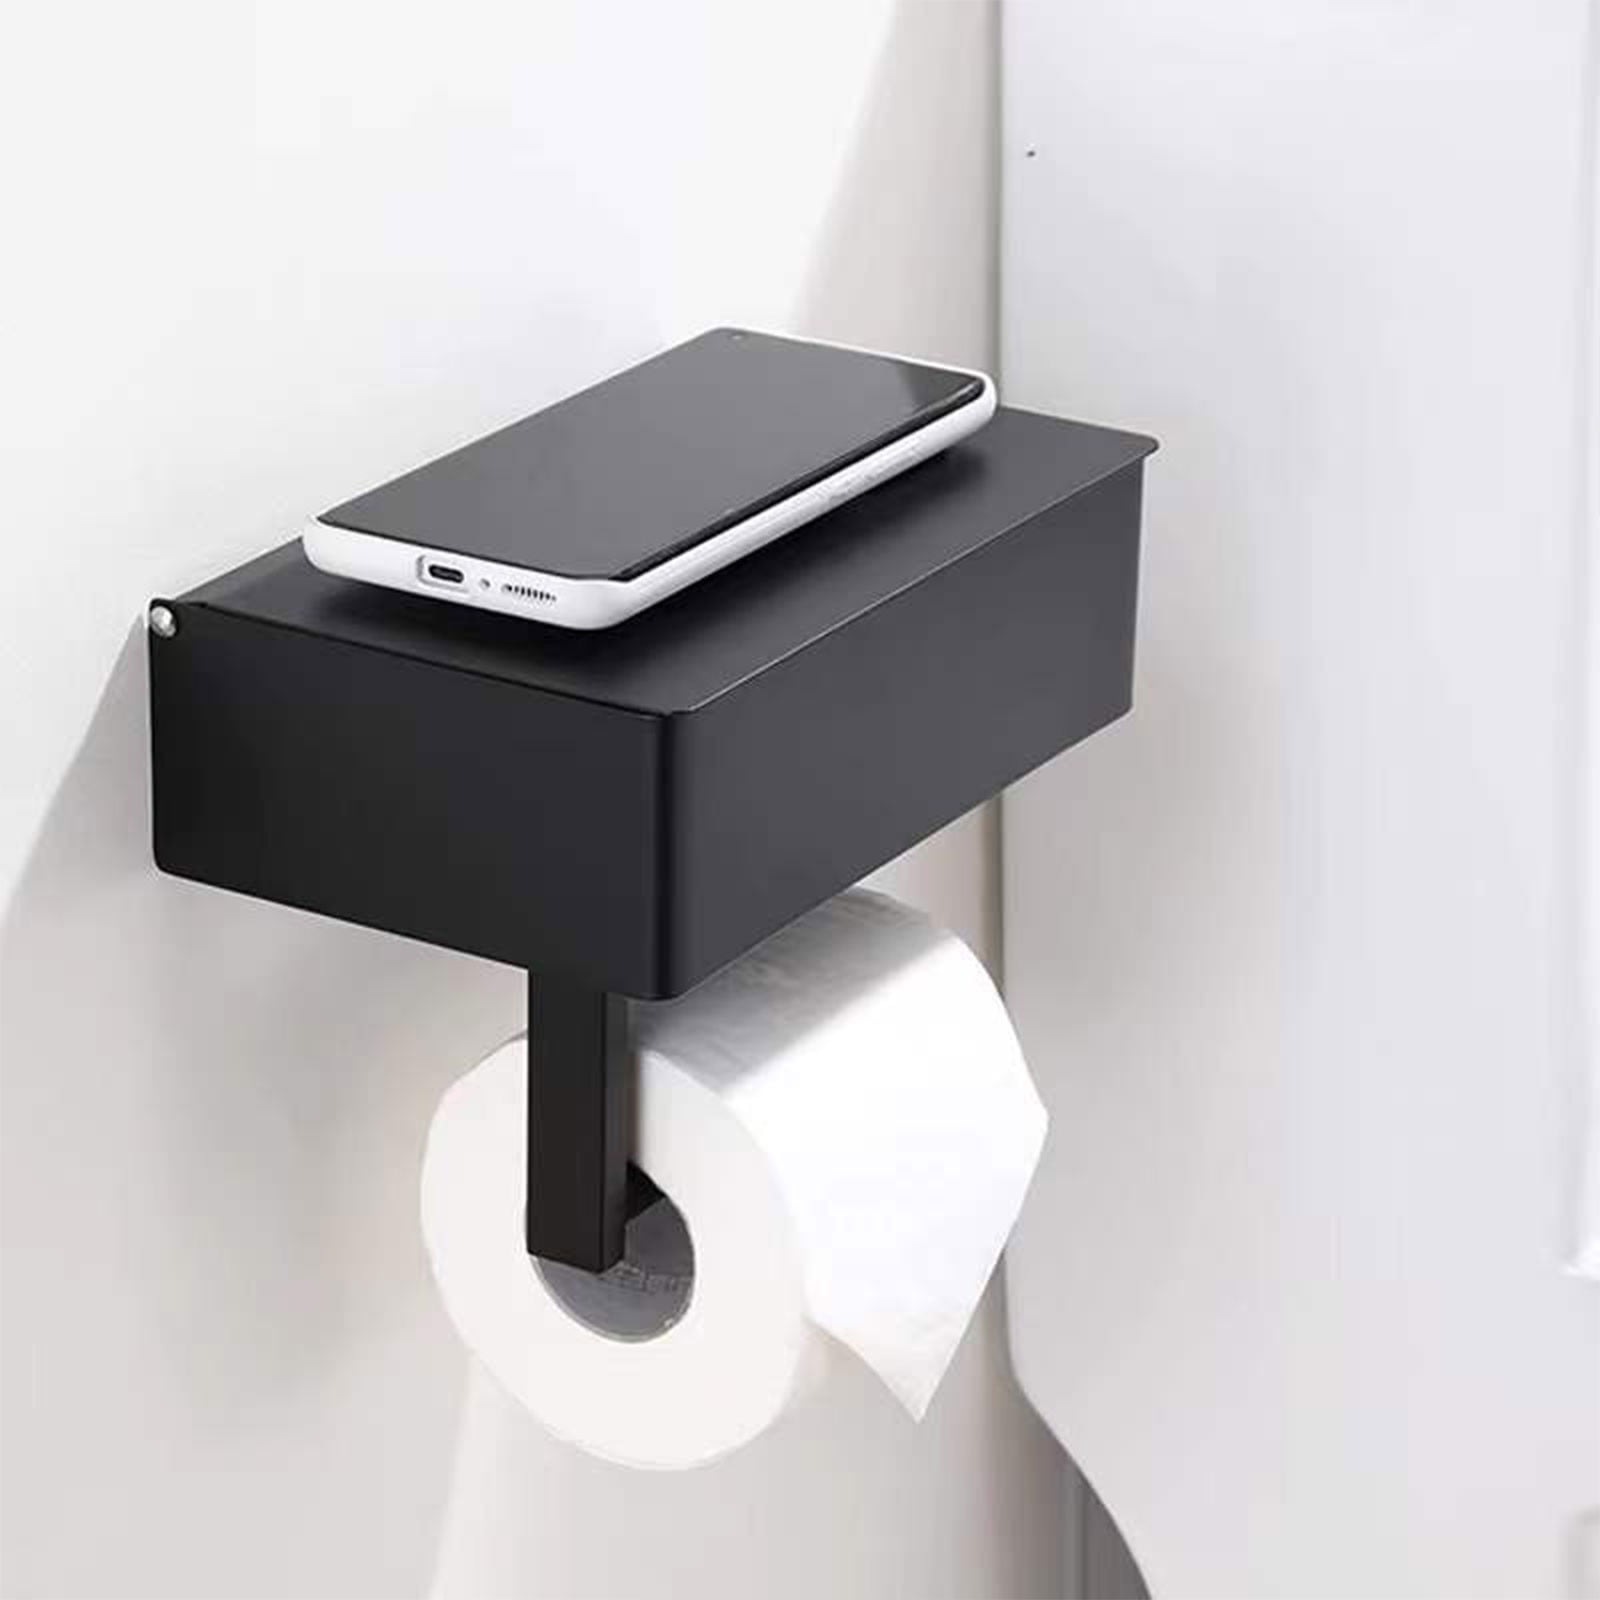 Toilet Paper Holder Shelf and Bathroom AccessoriesDIY Show Off